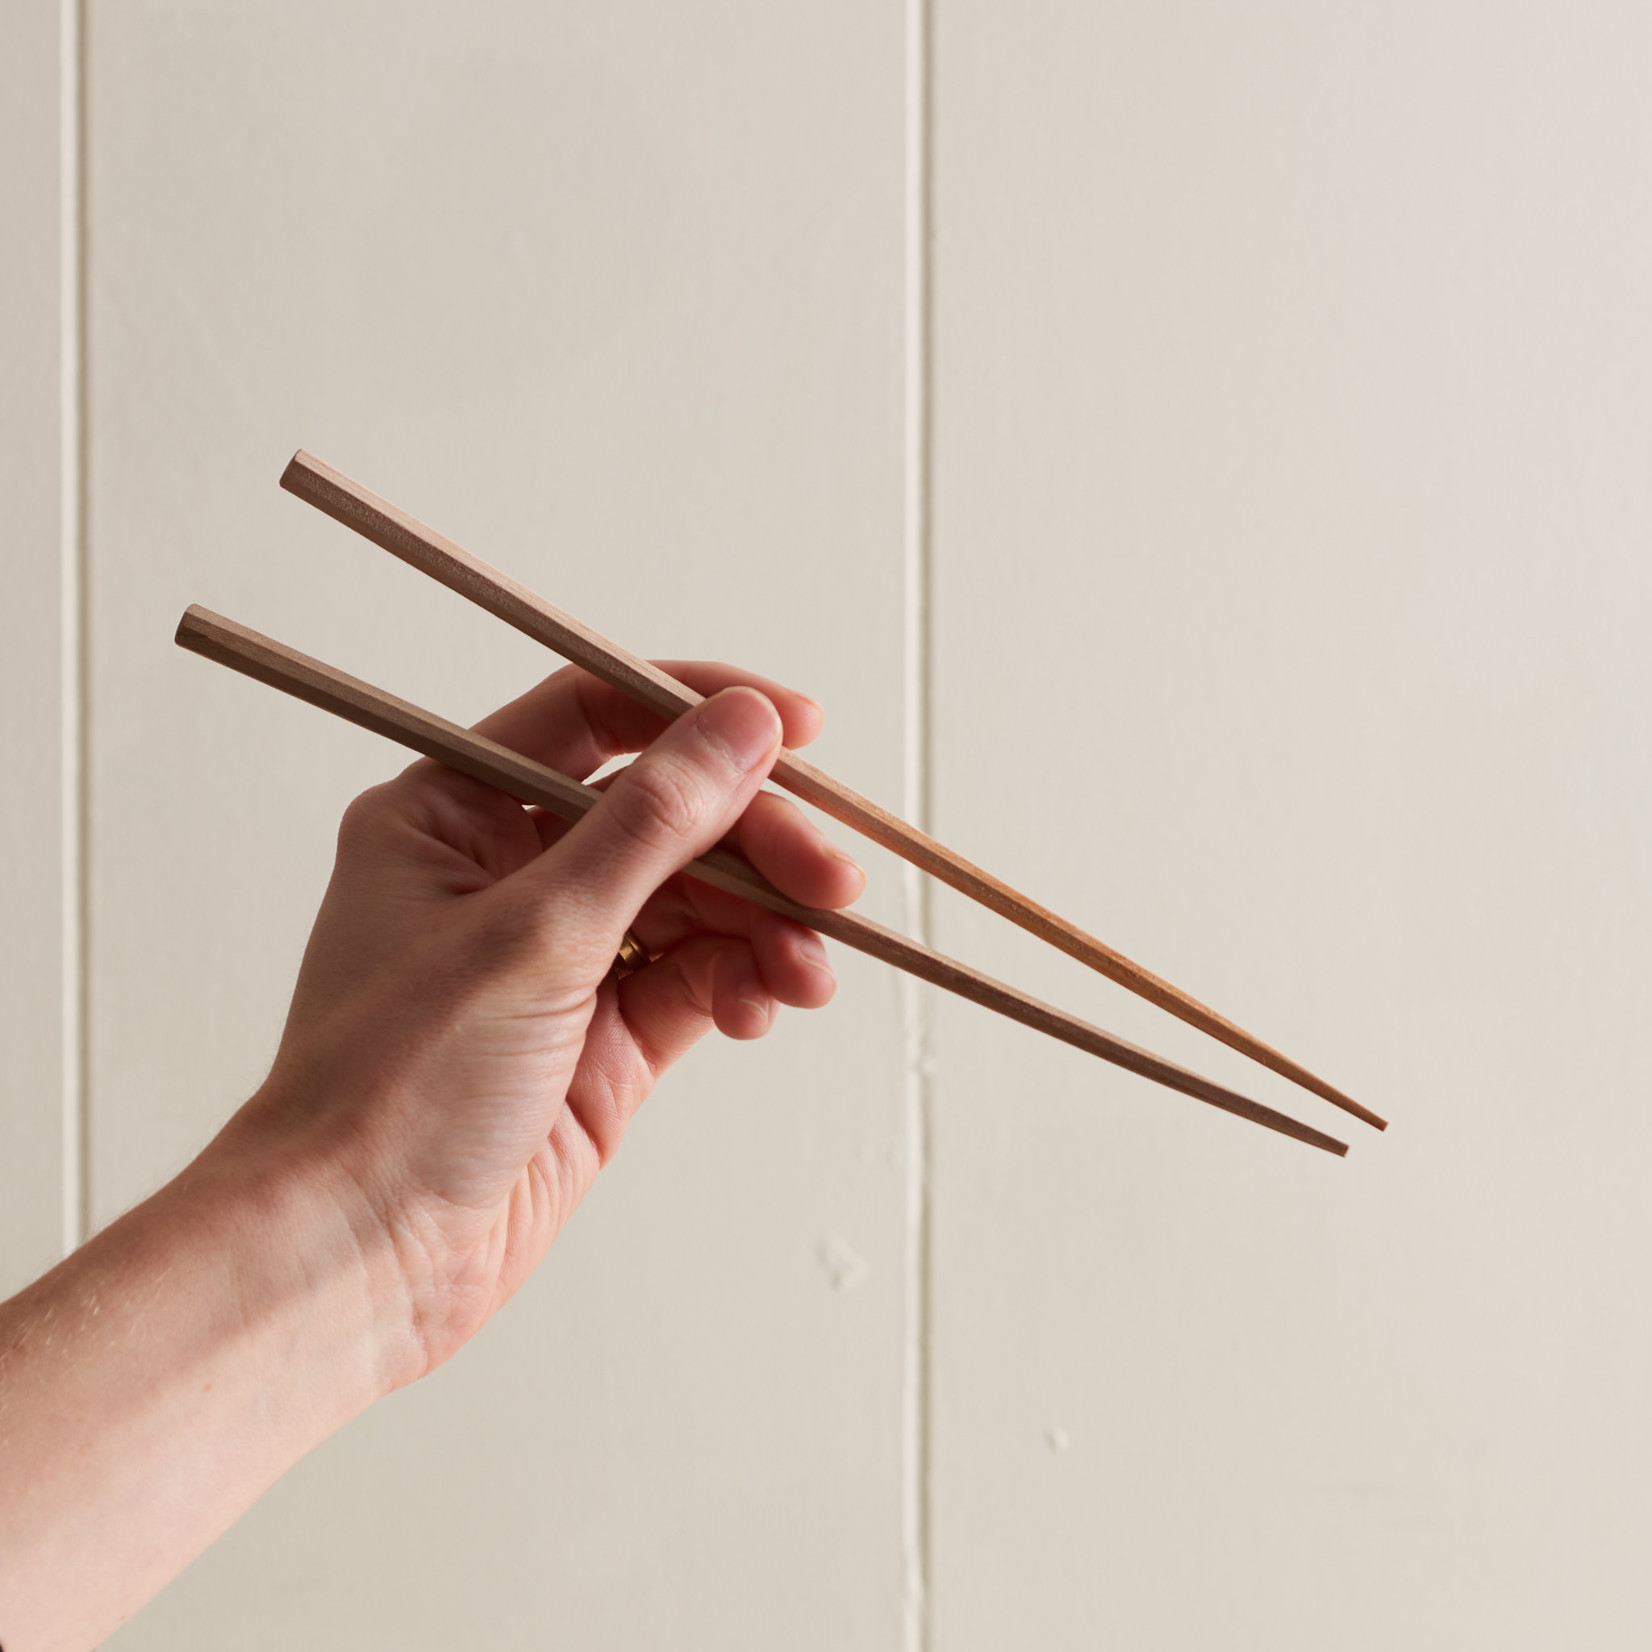 Wood Chopsticks finished with beeswax- persimmon